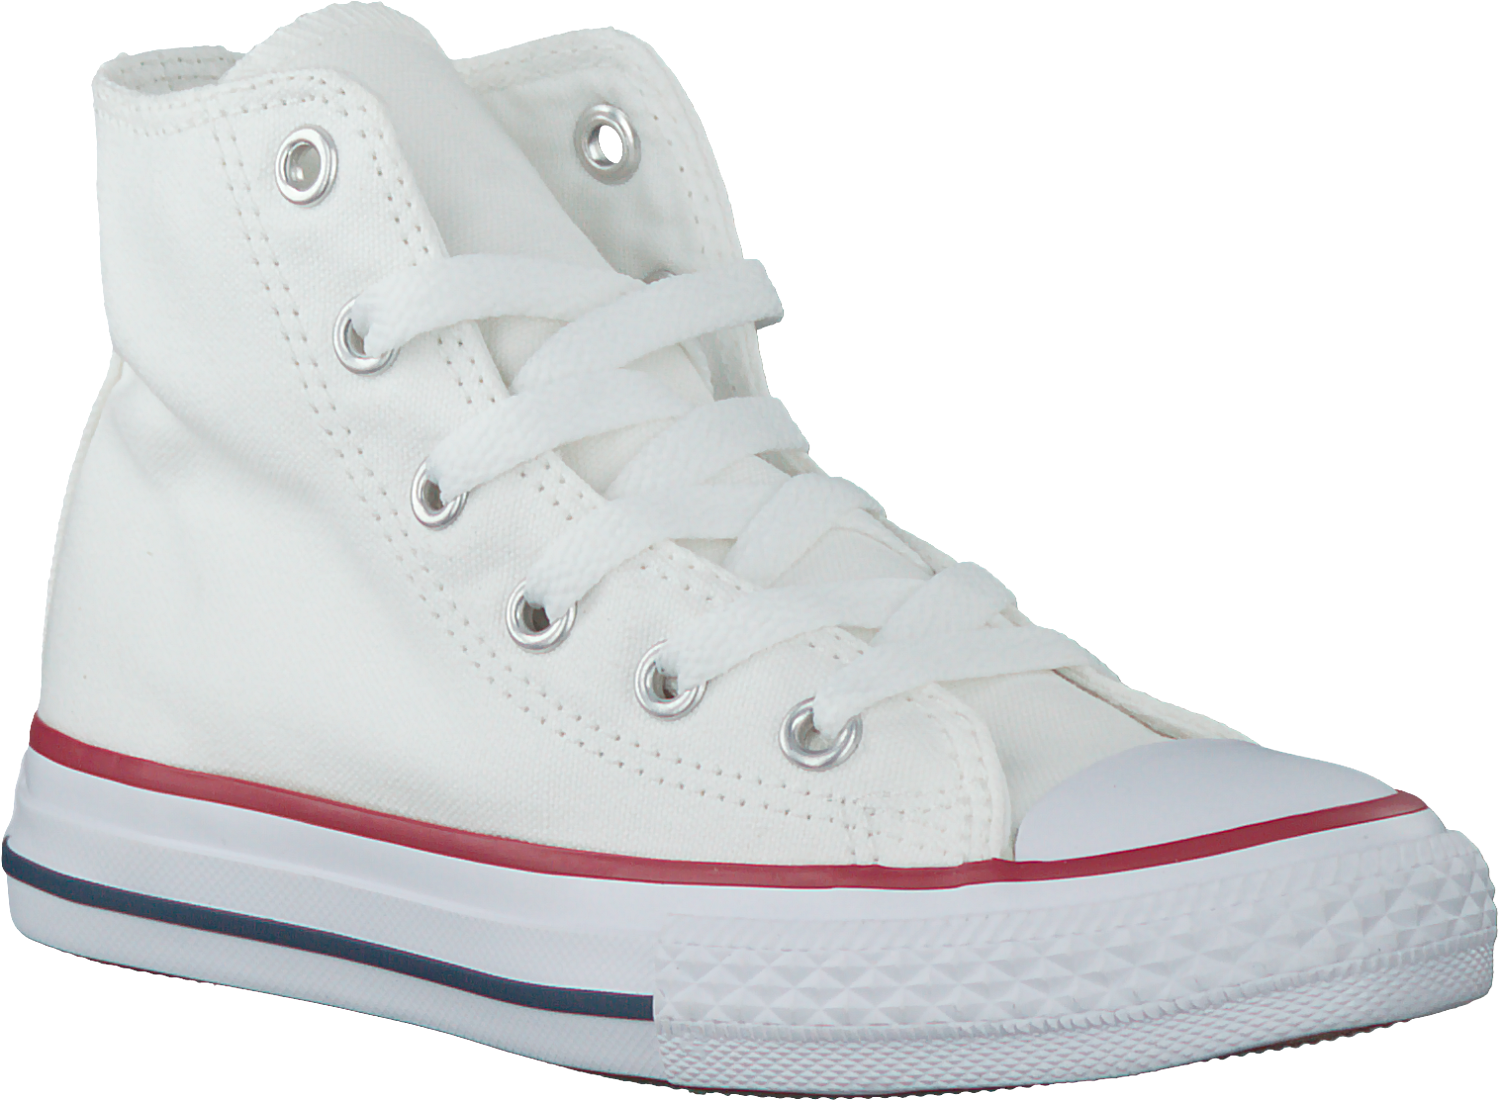 A White Shoe With Red Stripe